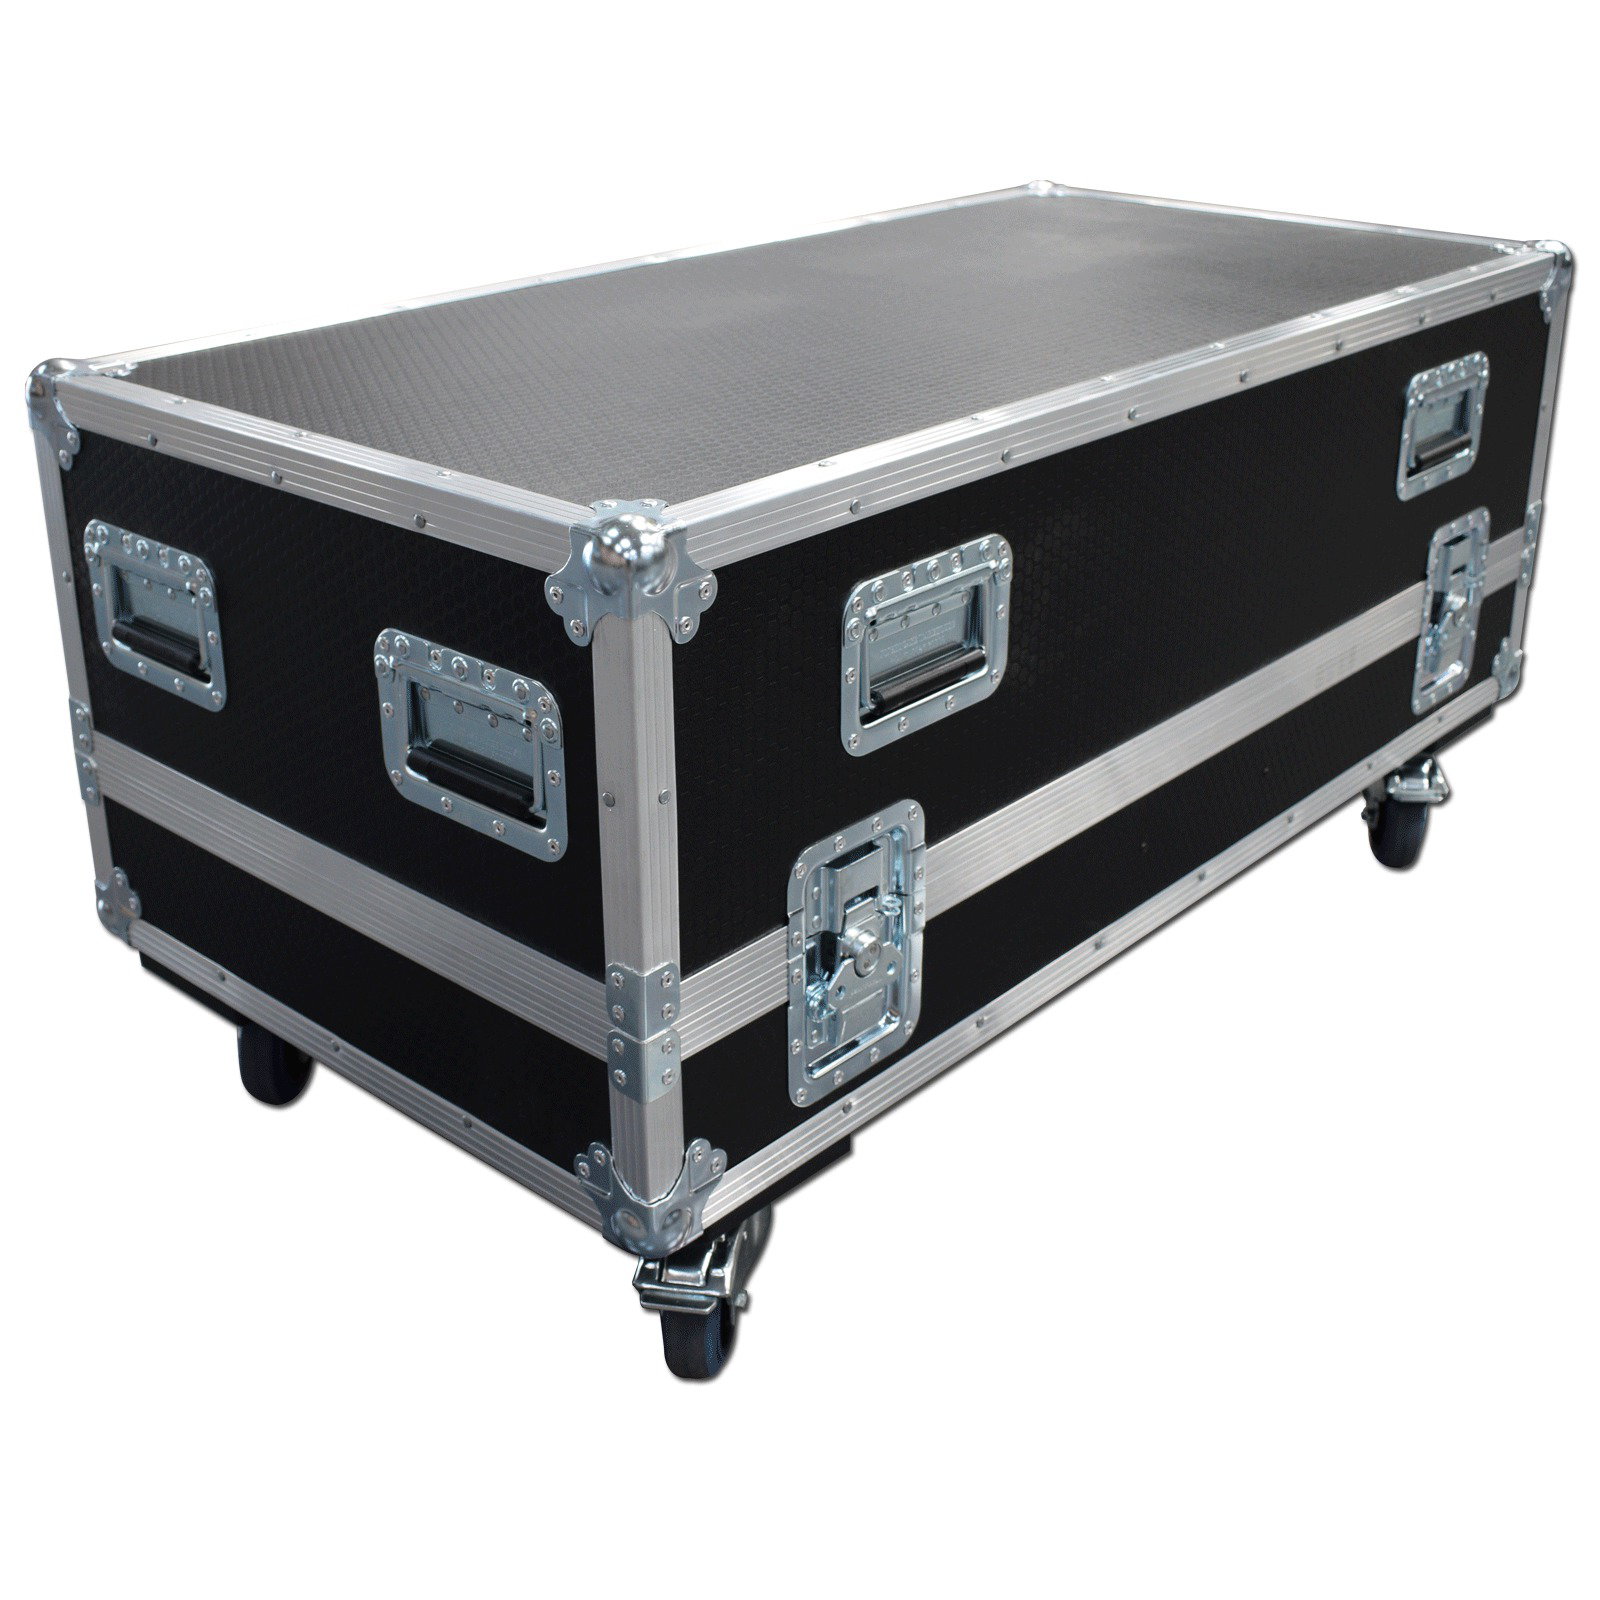 Twin Speaker Flightcase for KAM KT15 Sub Speaker With 150mm Storage Compartment 